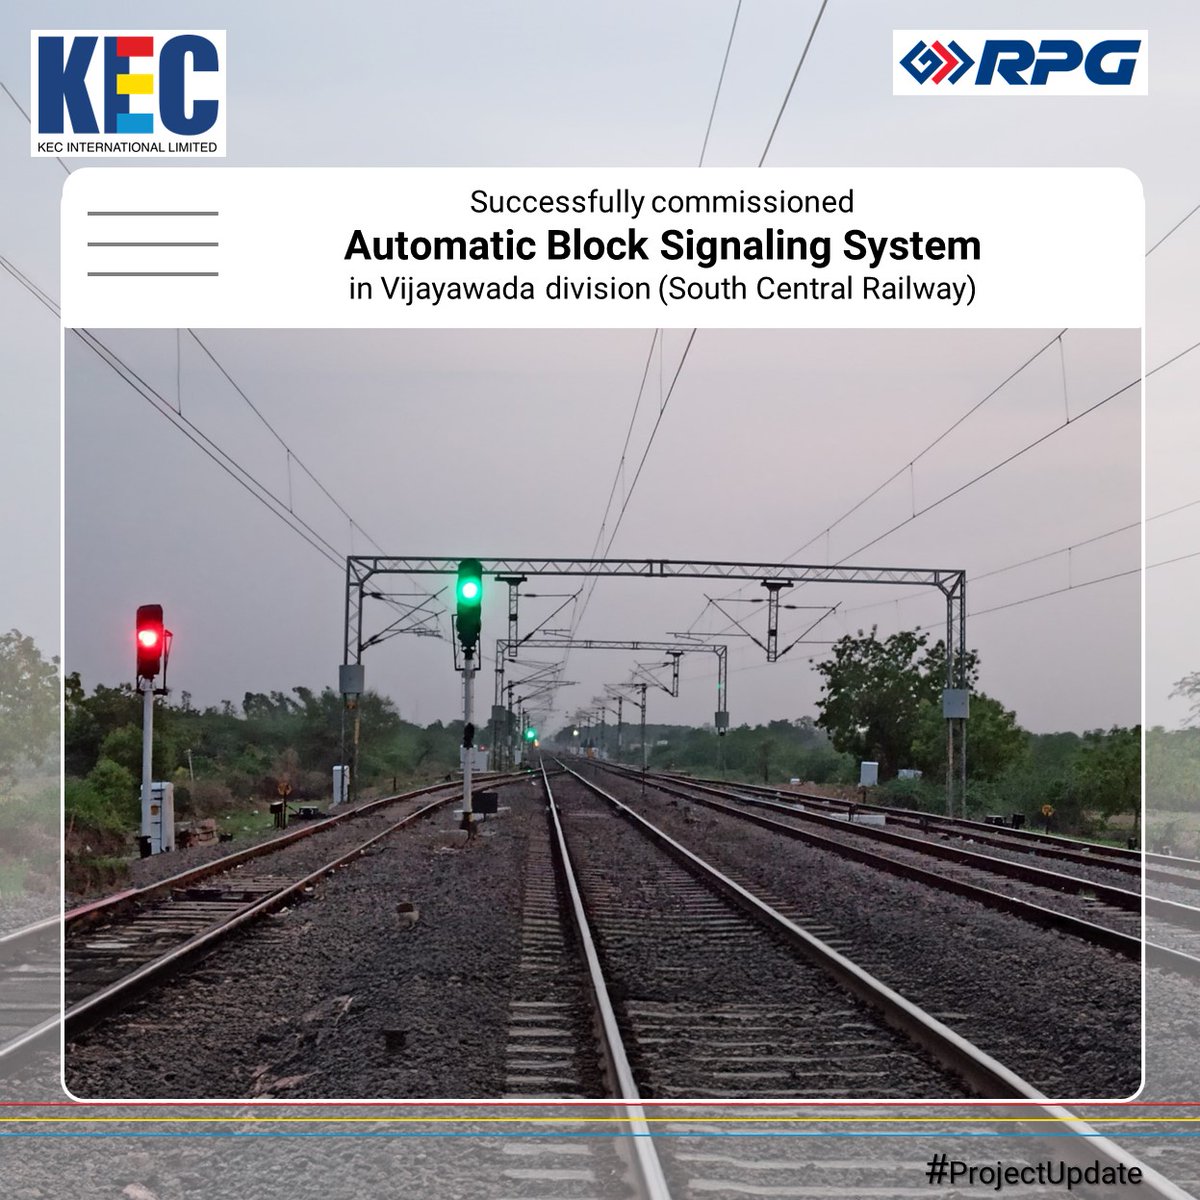 KEC is delighted to share that it has successfully commissioned the Automatic Block Signaling (ABS) system for the 'Gannavaram to Nuzvid' section in the Vijayawada division. 

#KECInternational #ThisIsRPG
@kejriwalv1
@RPGEnterprises
@RPG_Cables_KEC
@SaeTowers